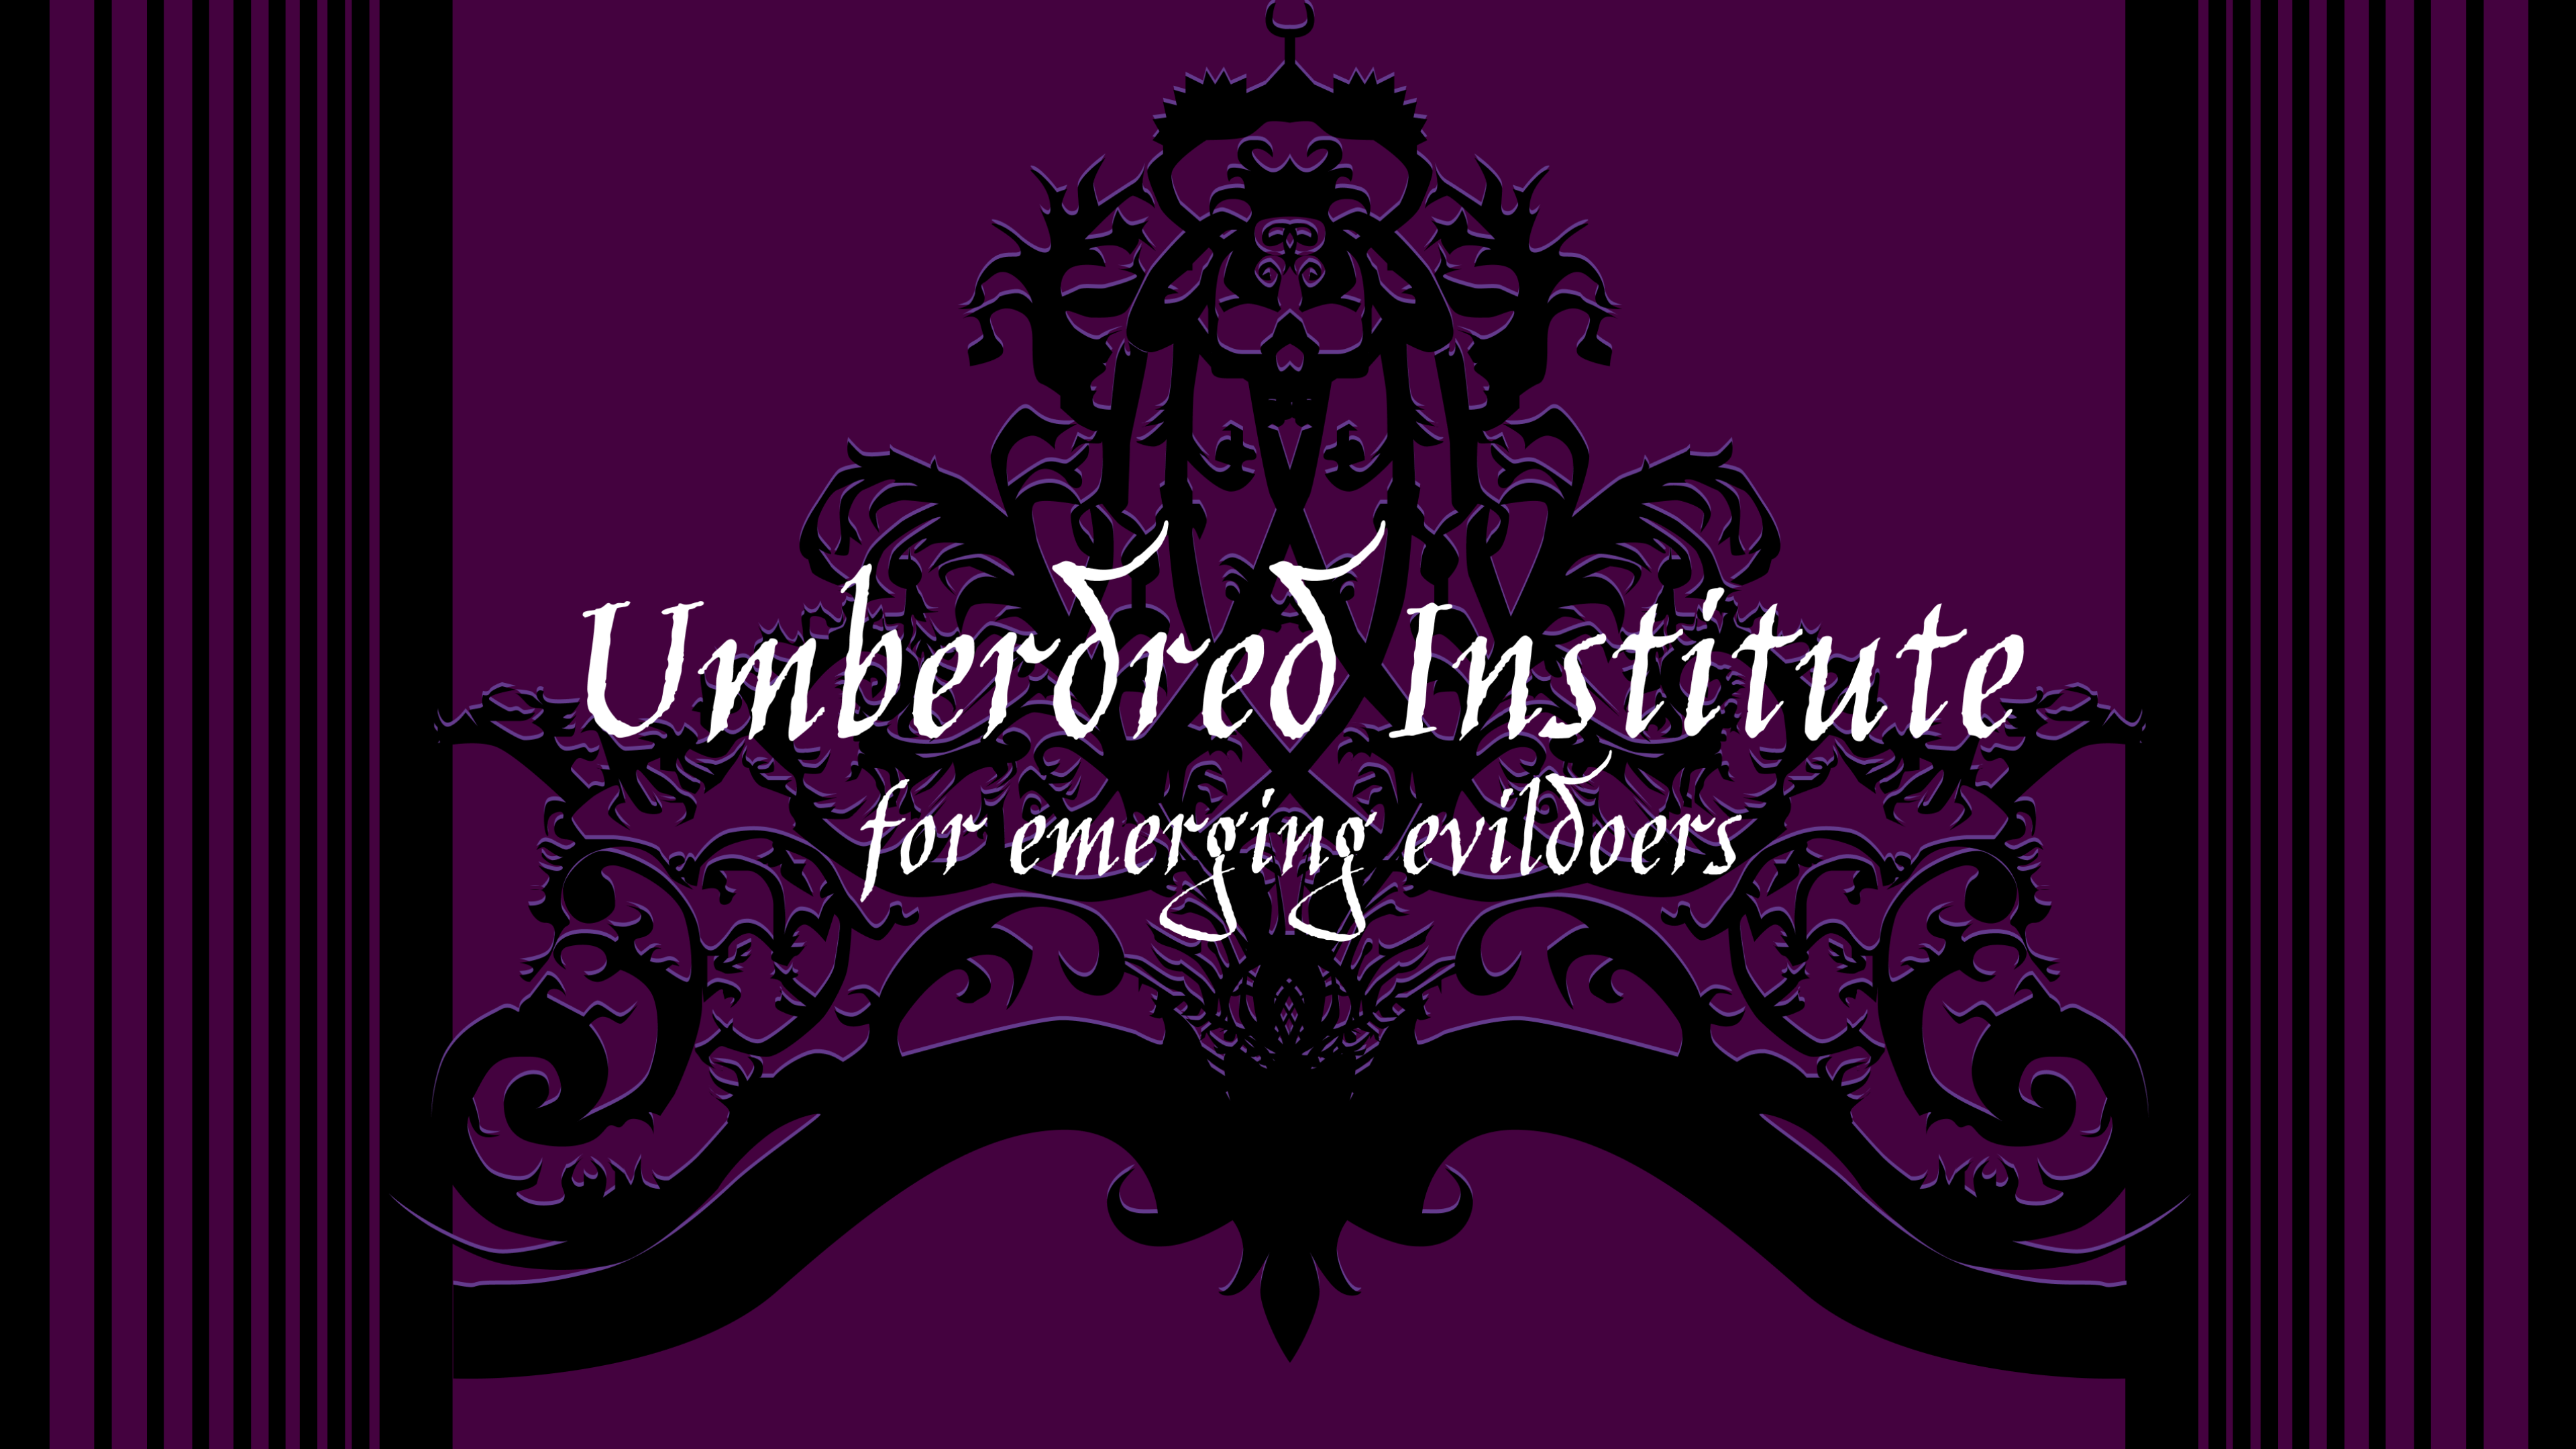 The Umberdred Institute for Emerging Evildoers